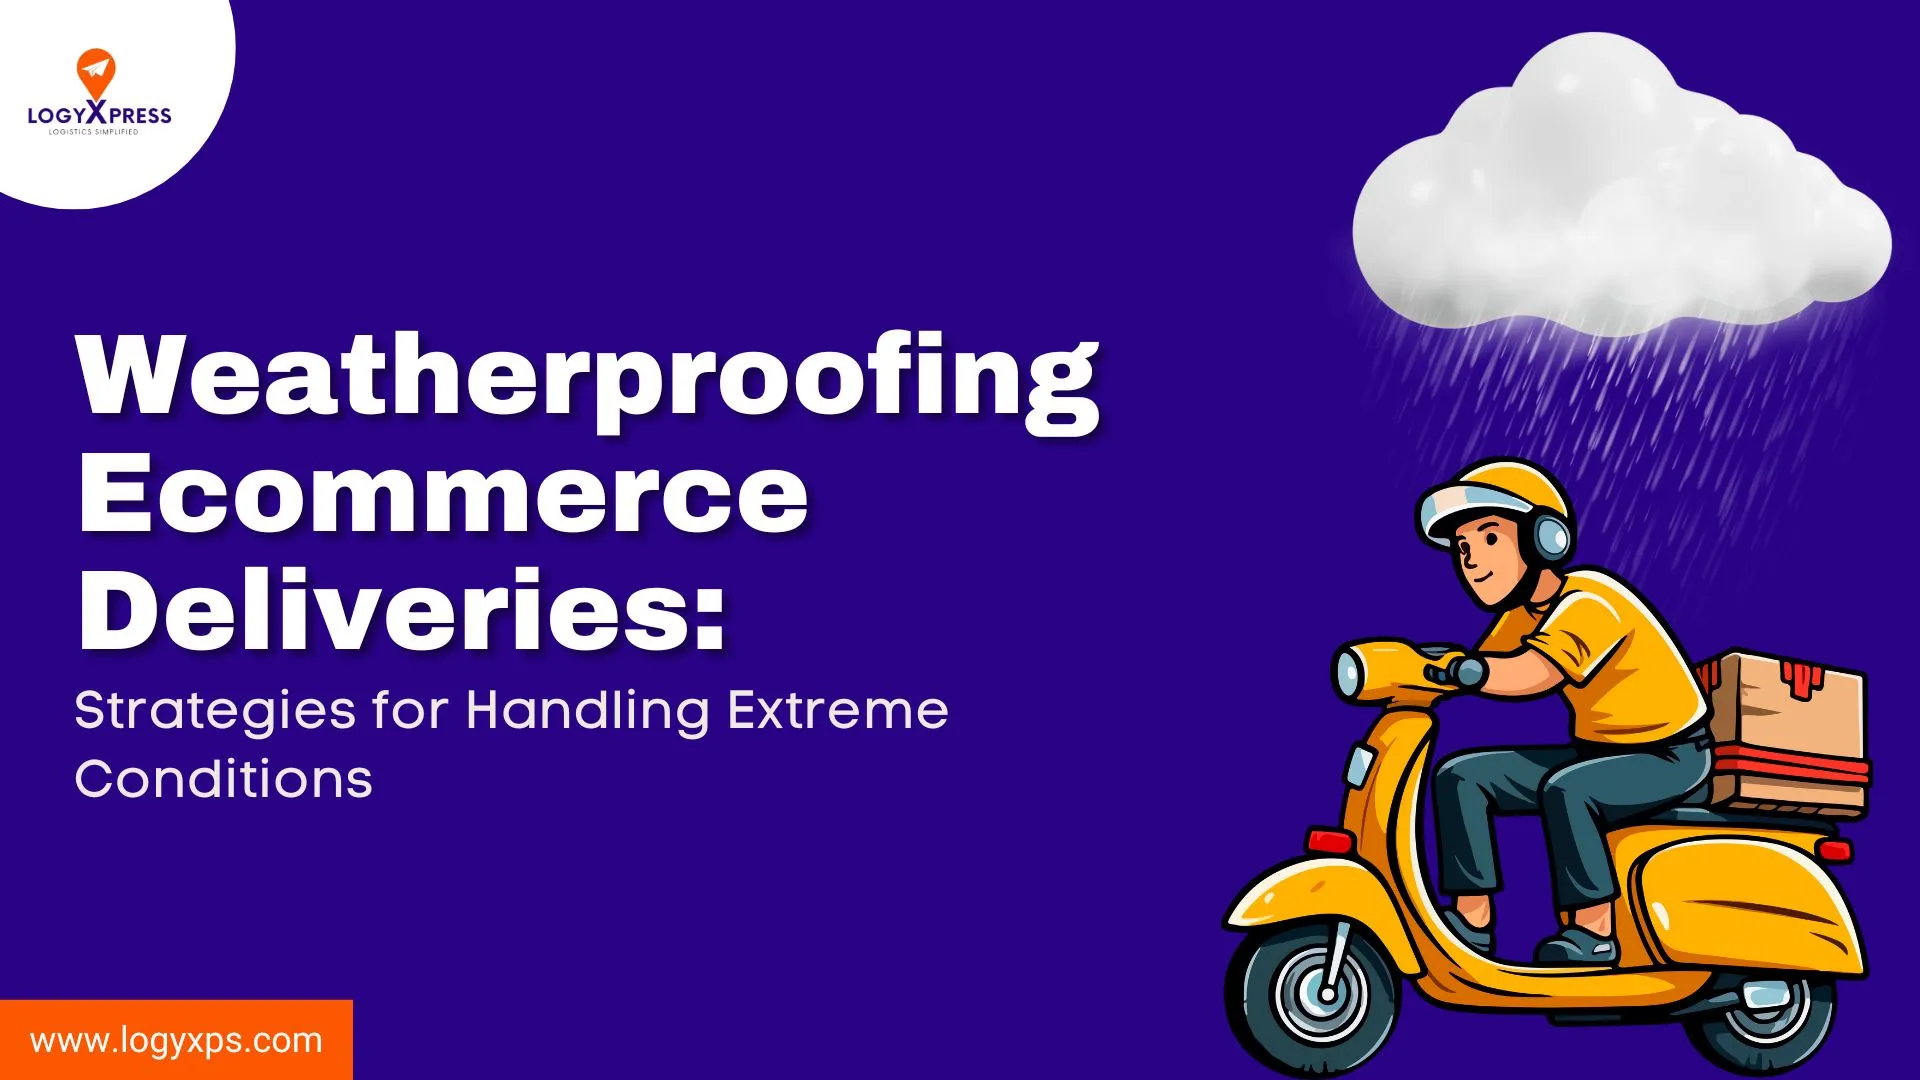 Weatherproofing Ecommerce Deliveries Strategies for Handling Extreme Conditions